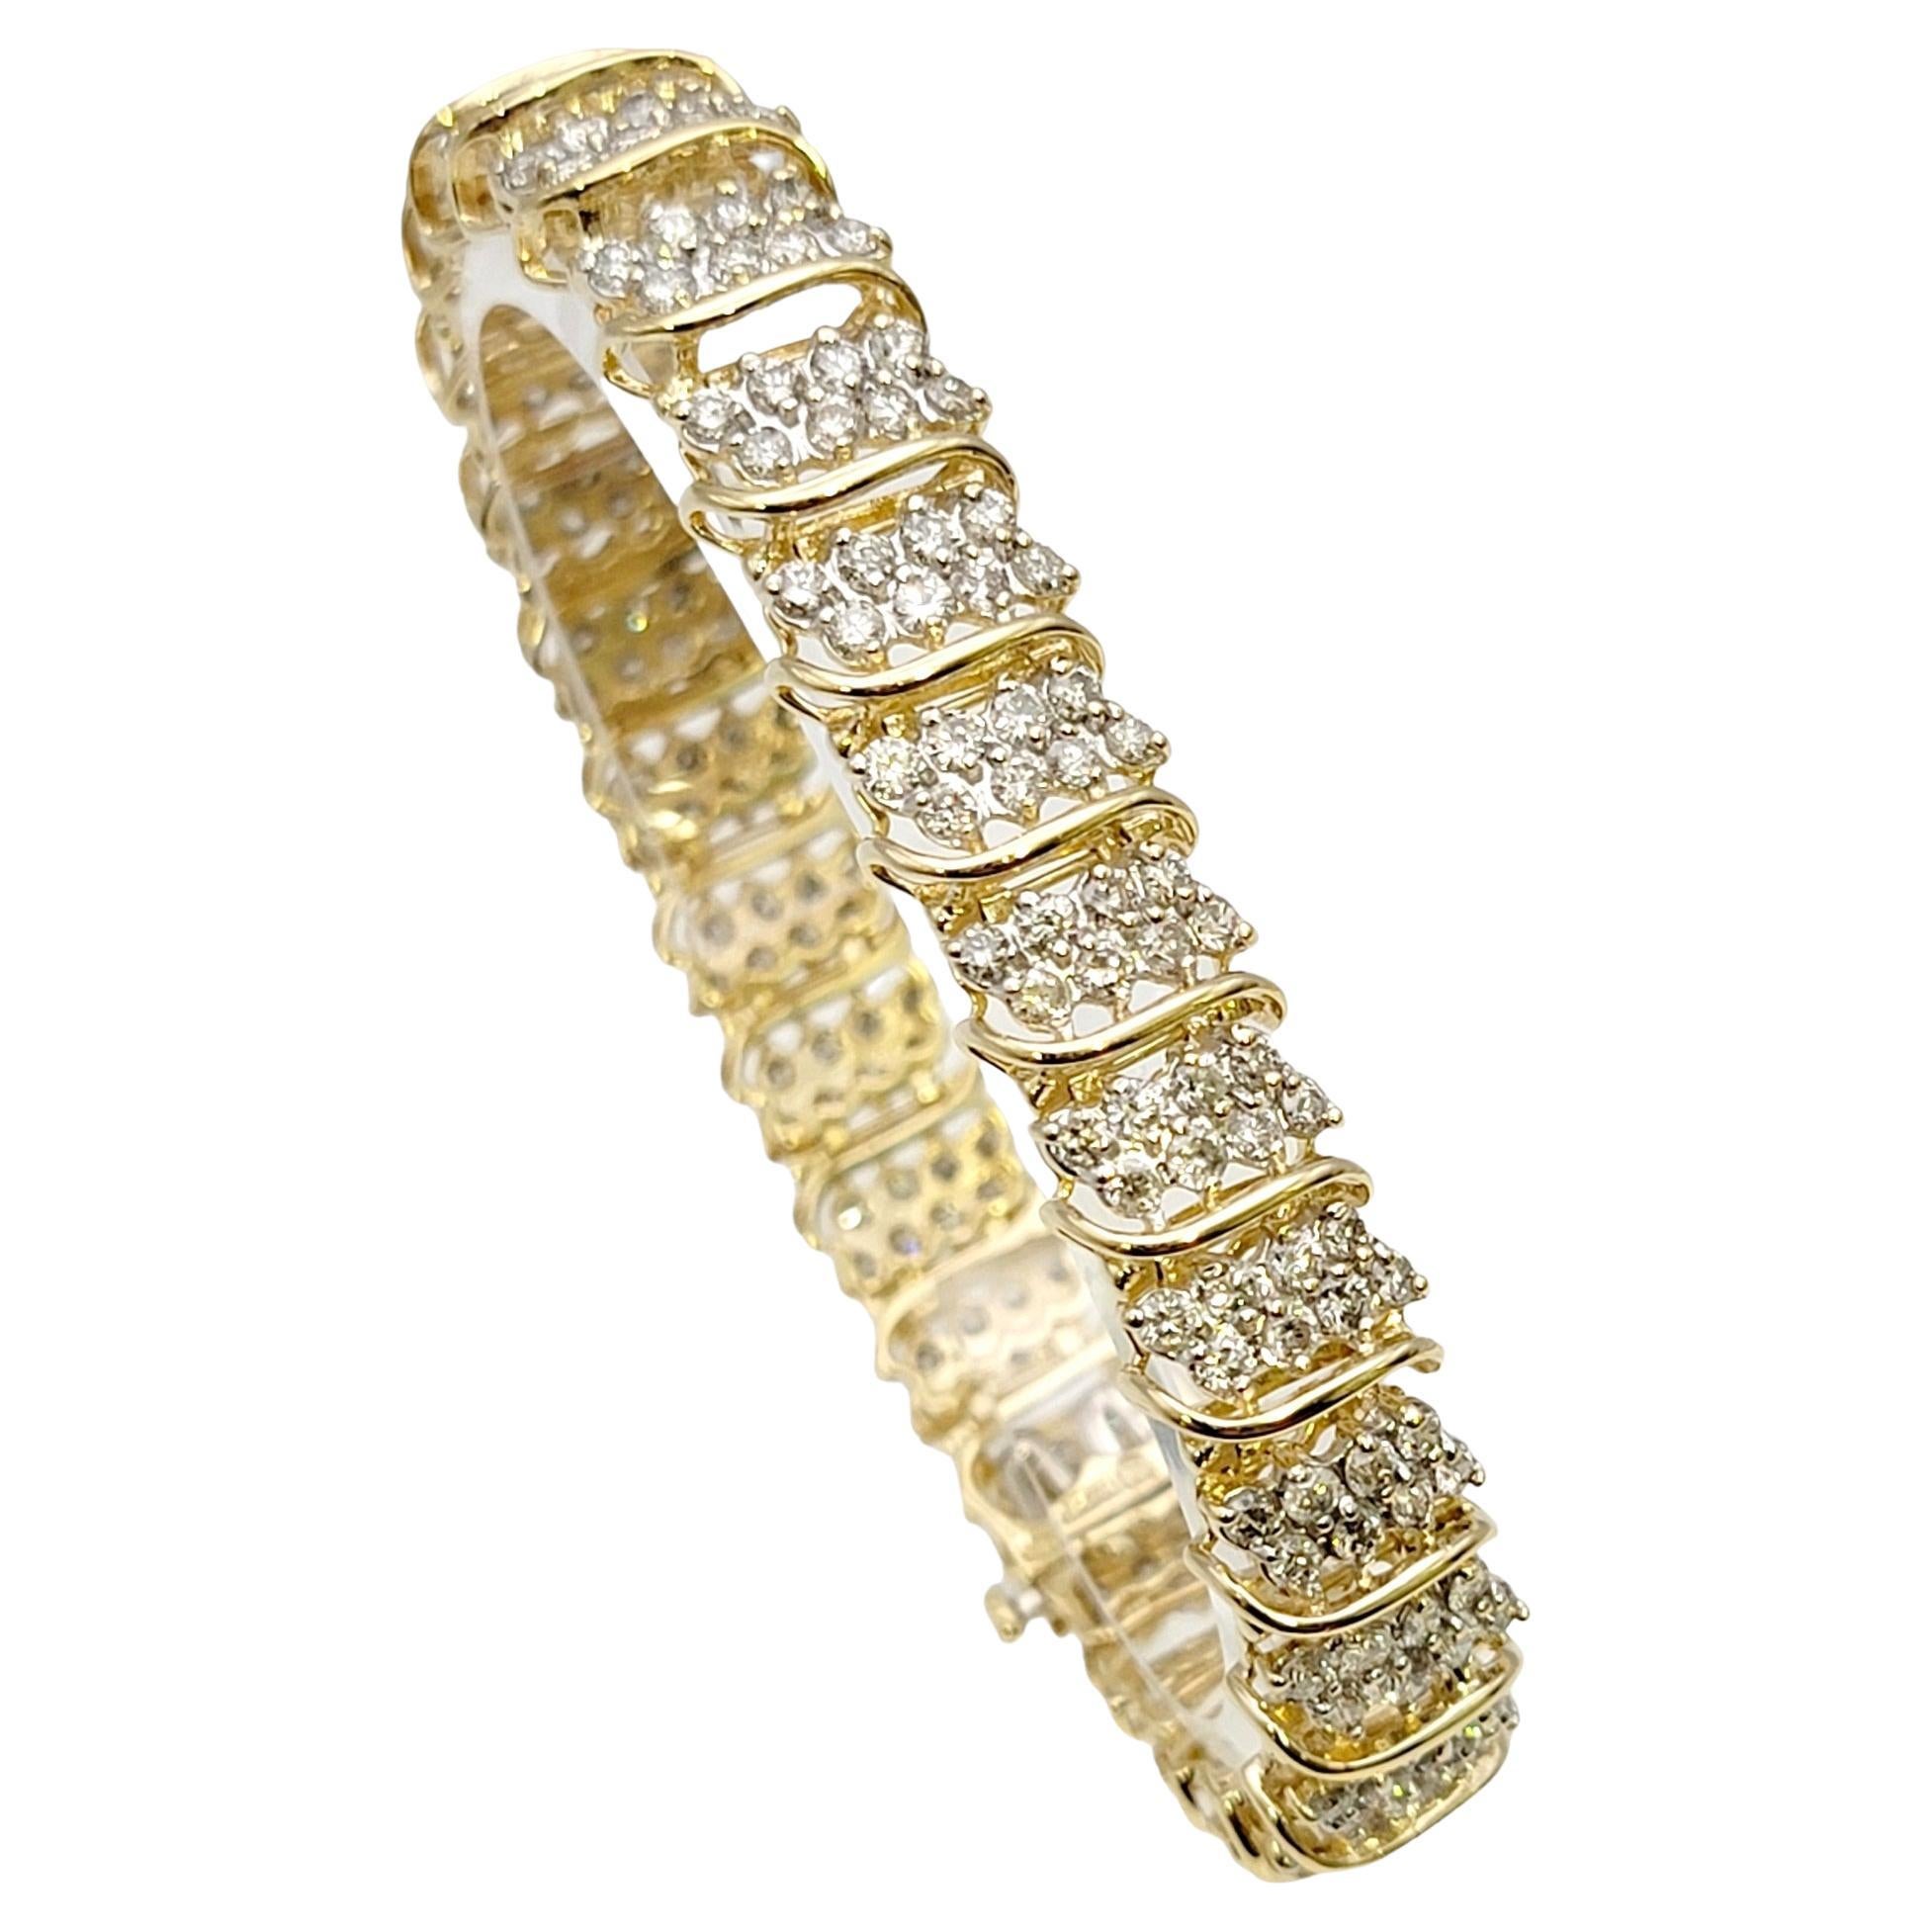 8.81 Carats Total Diamond Cluster 'S' Link Tennis Bracelet in Yellow Gold